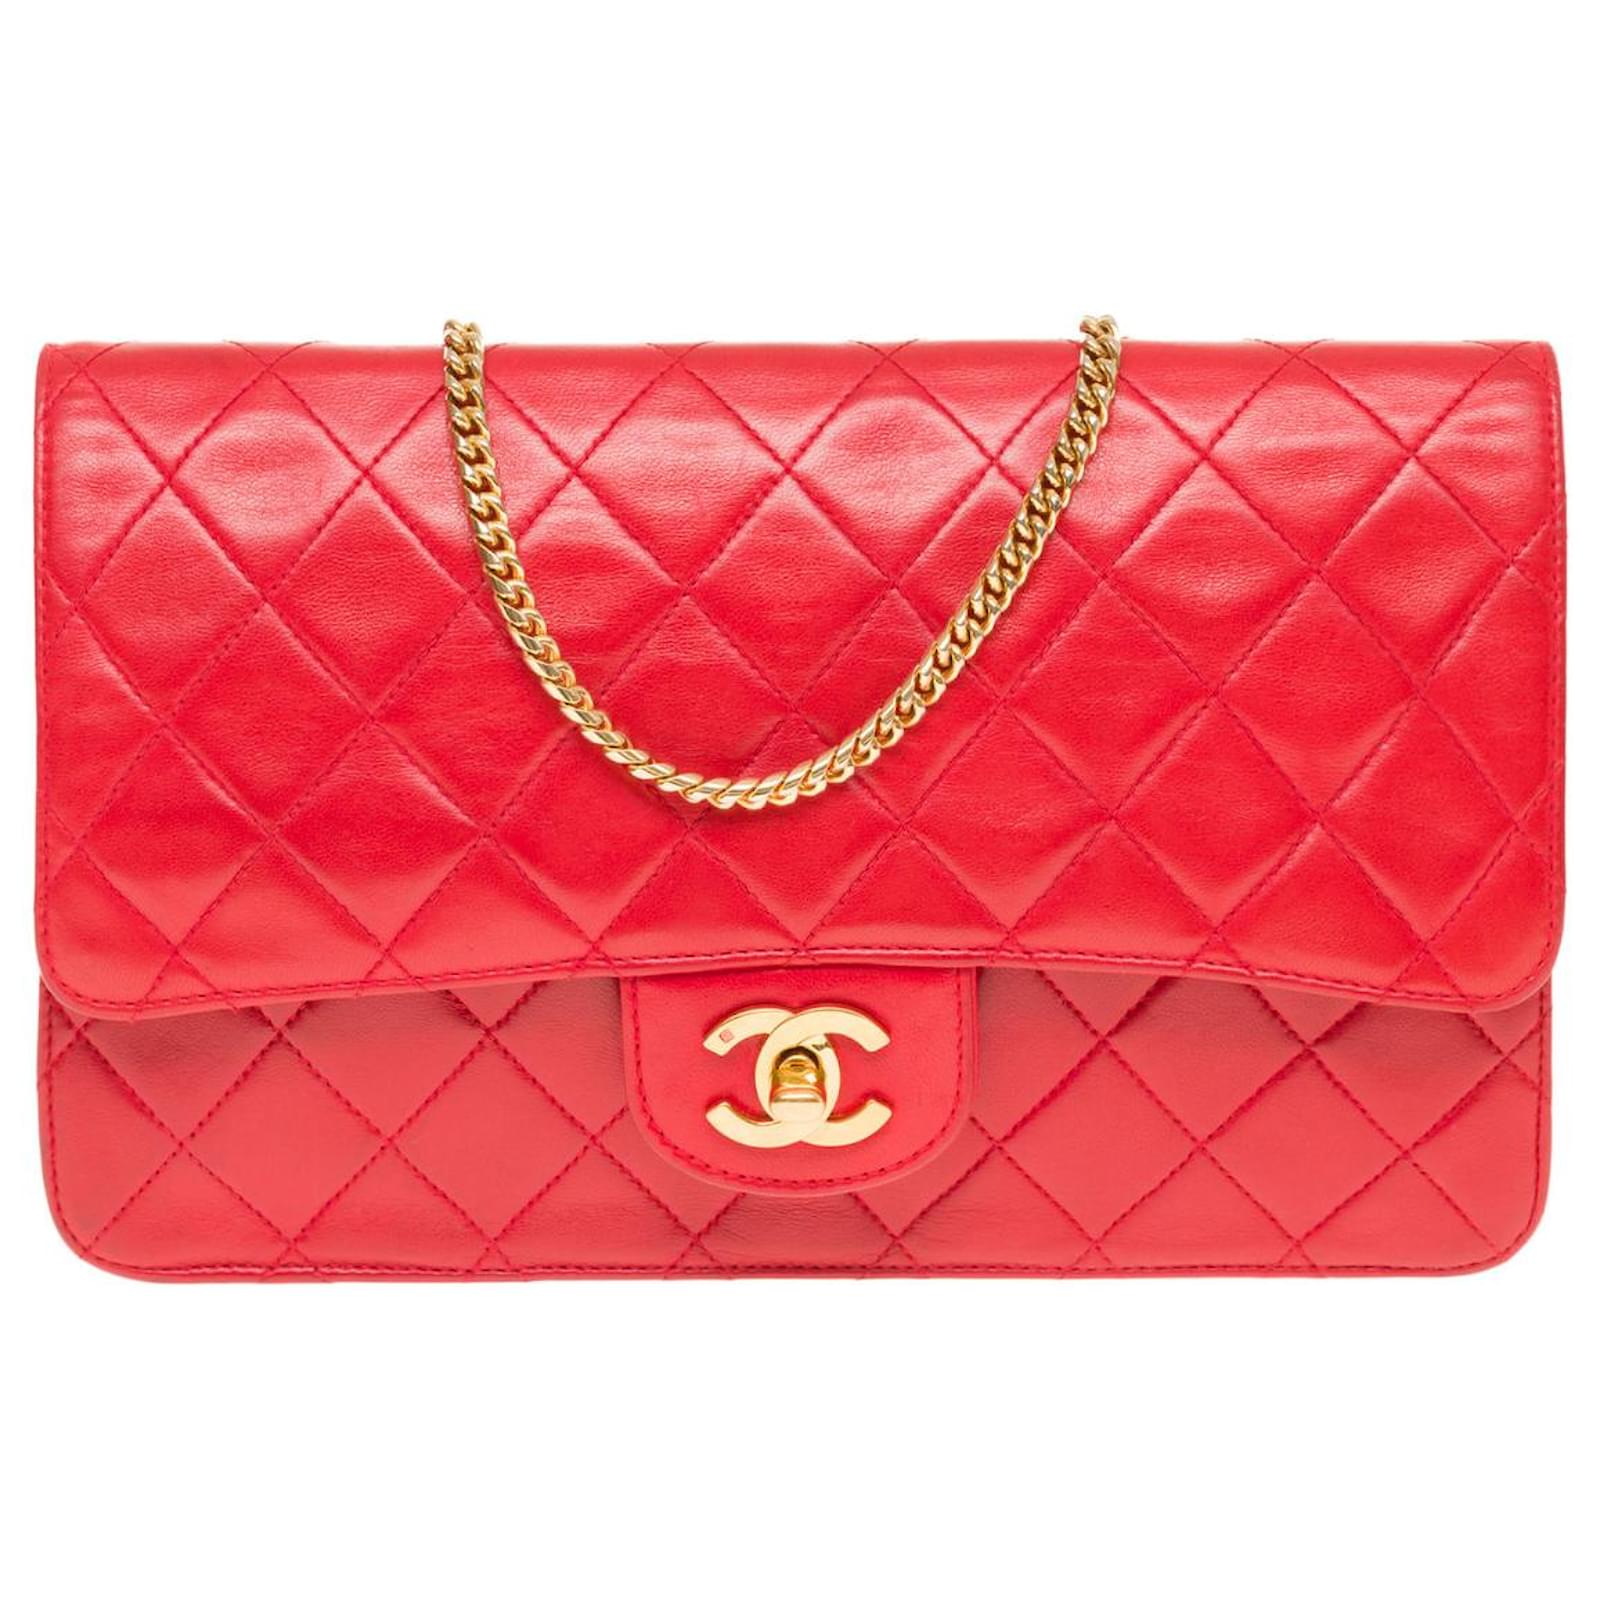 Timeless CHANEL CLASSIC FLAP BAG CROSSBODY BAG IN RED QUILTED